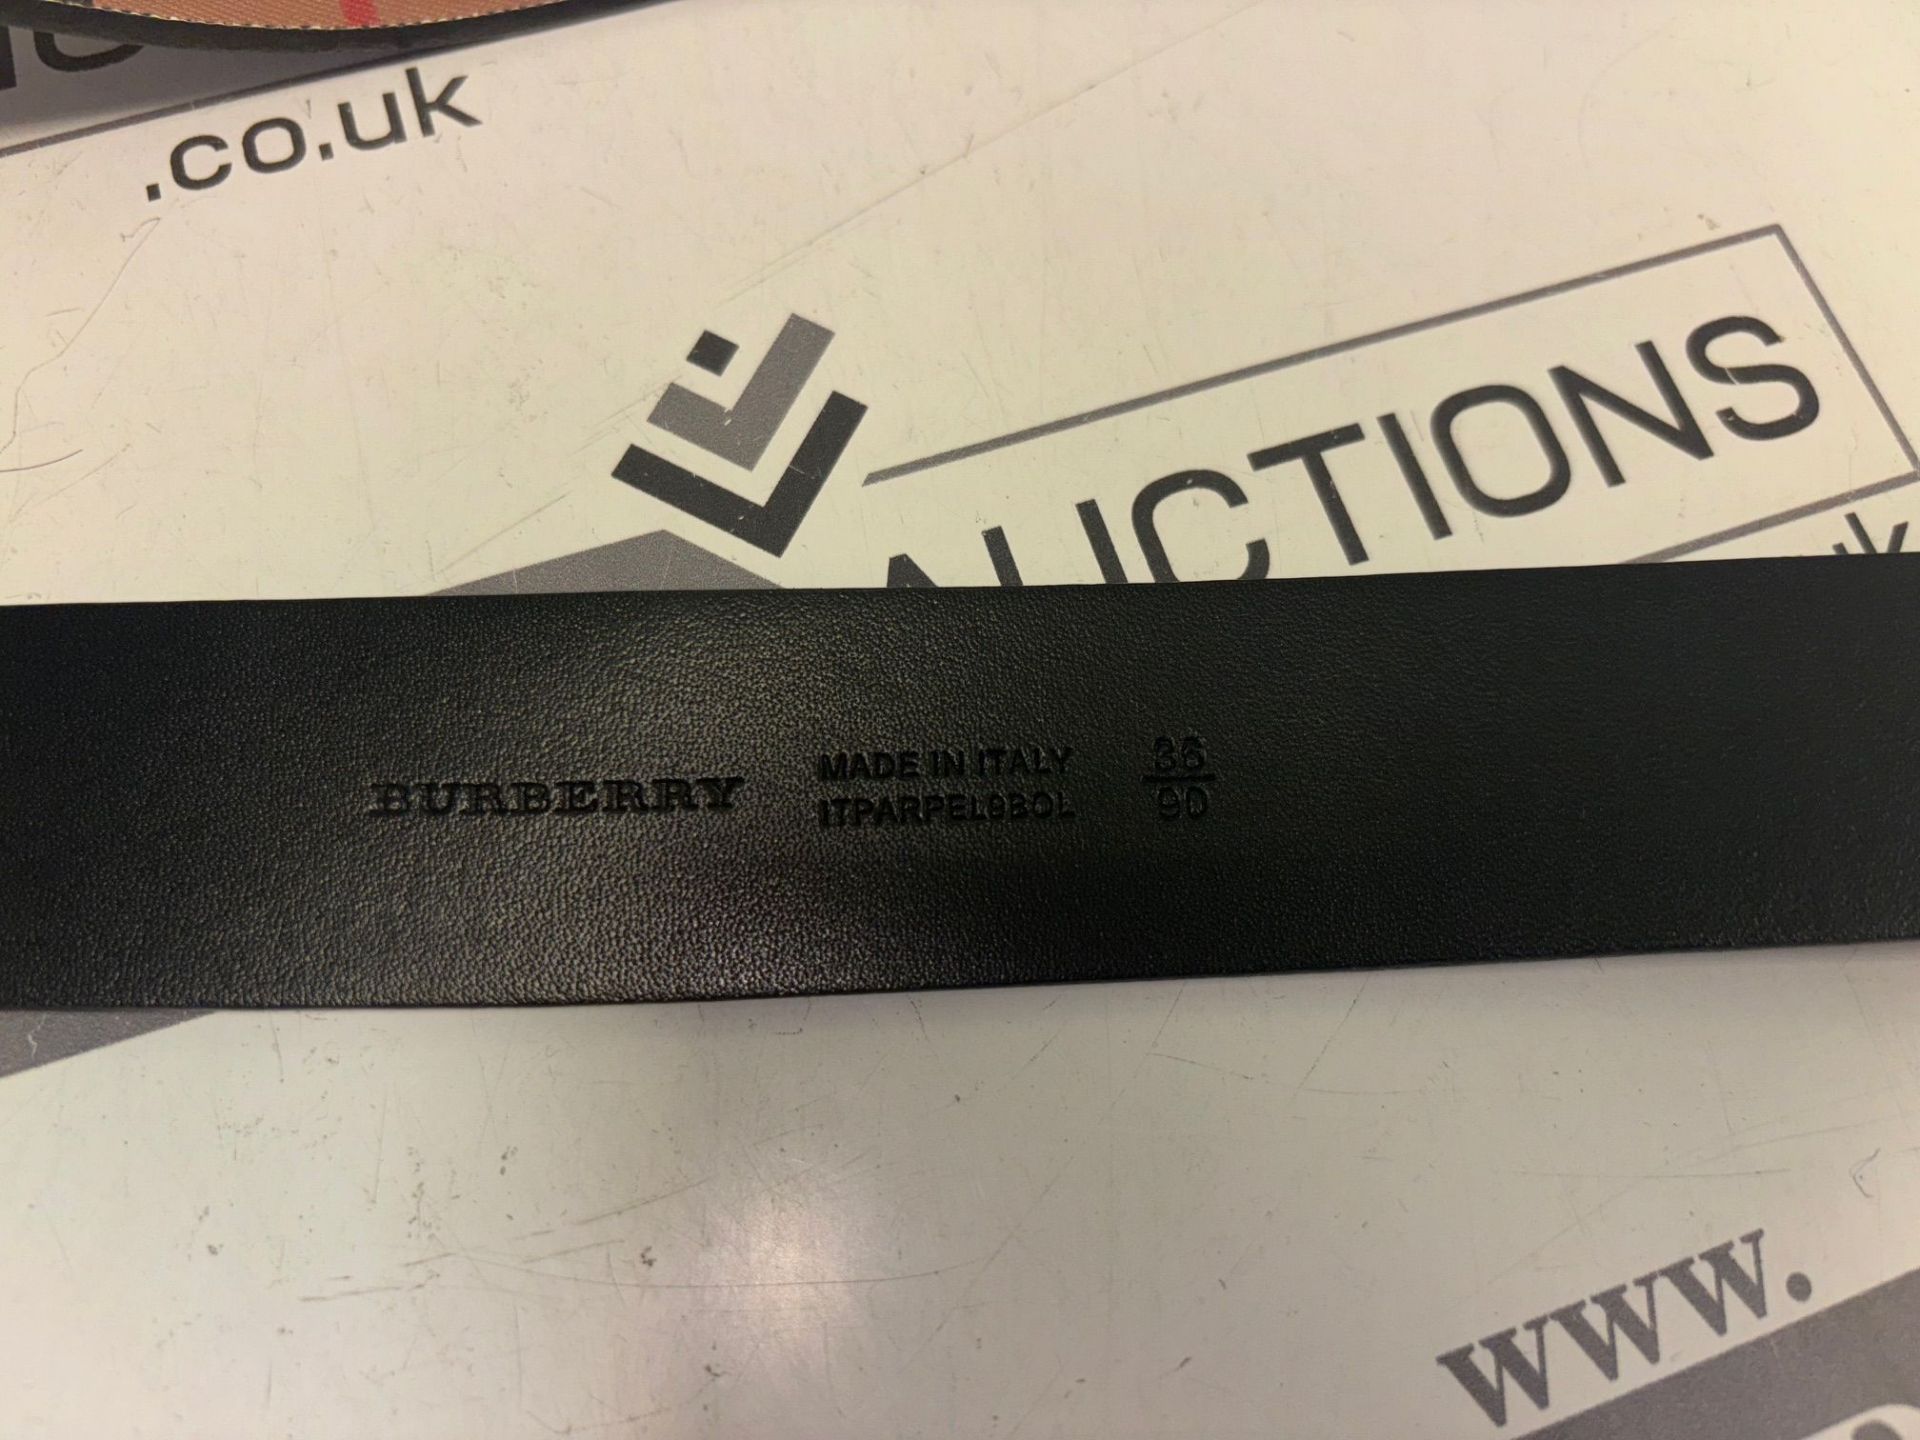 Genuine Burberry Vintage Check Belt. RRP £510. Single prong buckle Adjustable fit Cotton/leather/ - Image 6 of 7